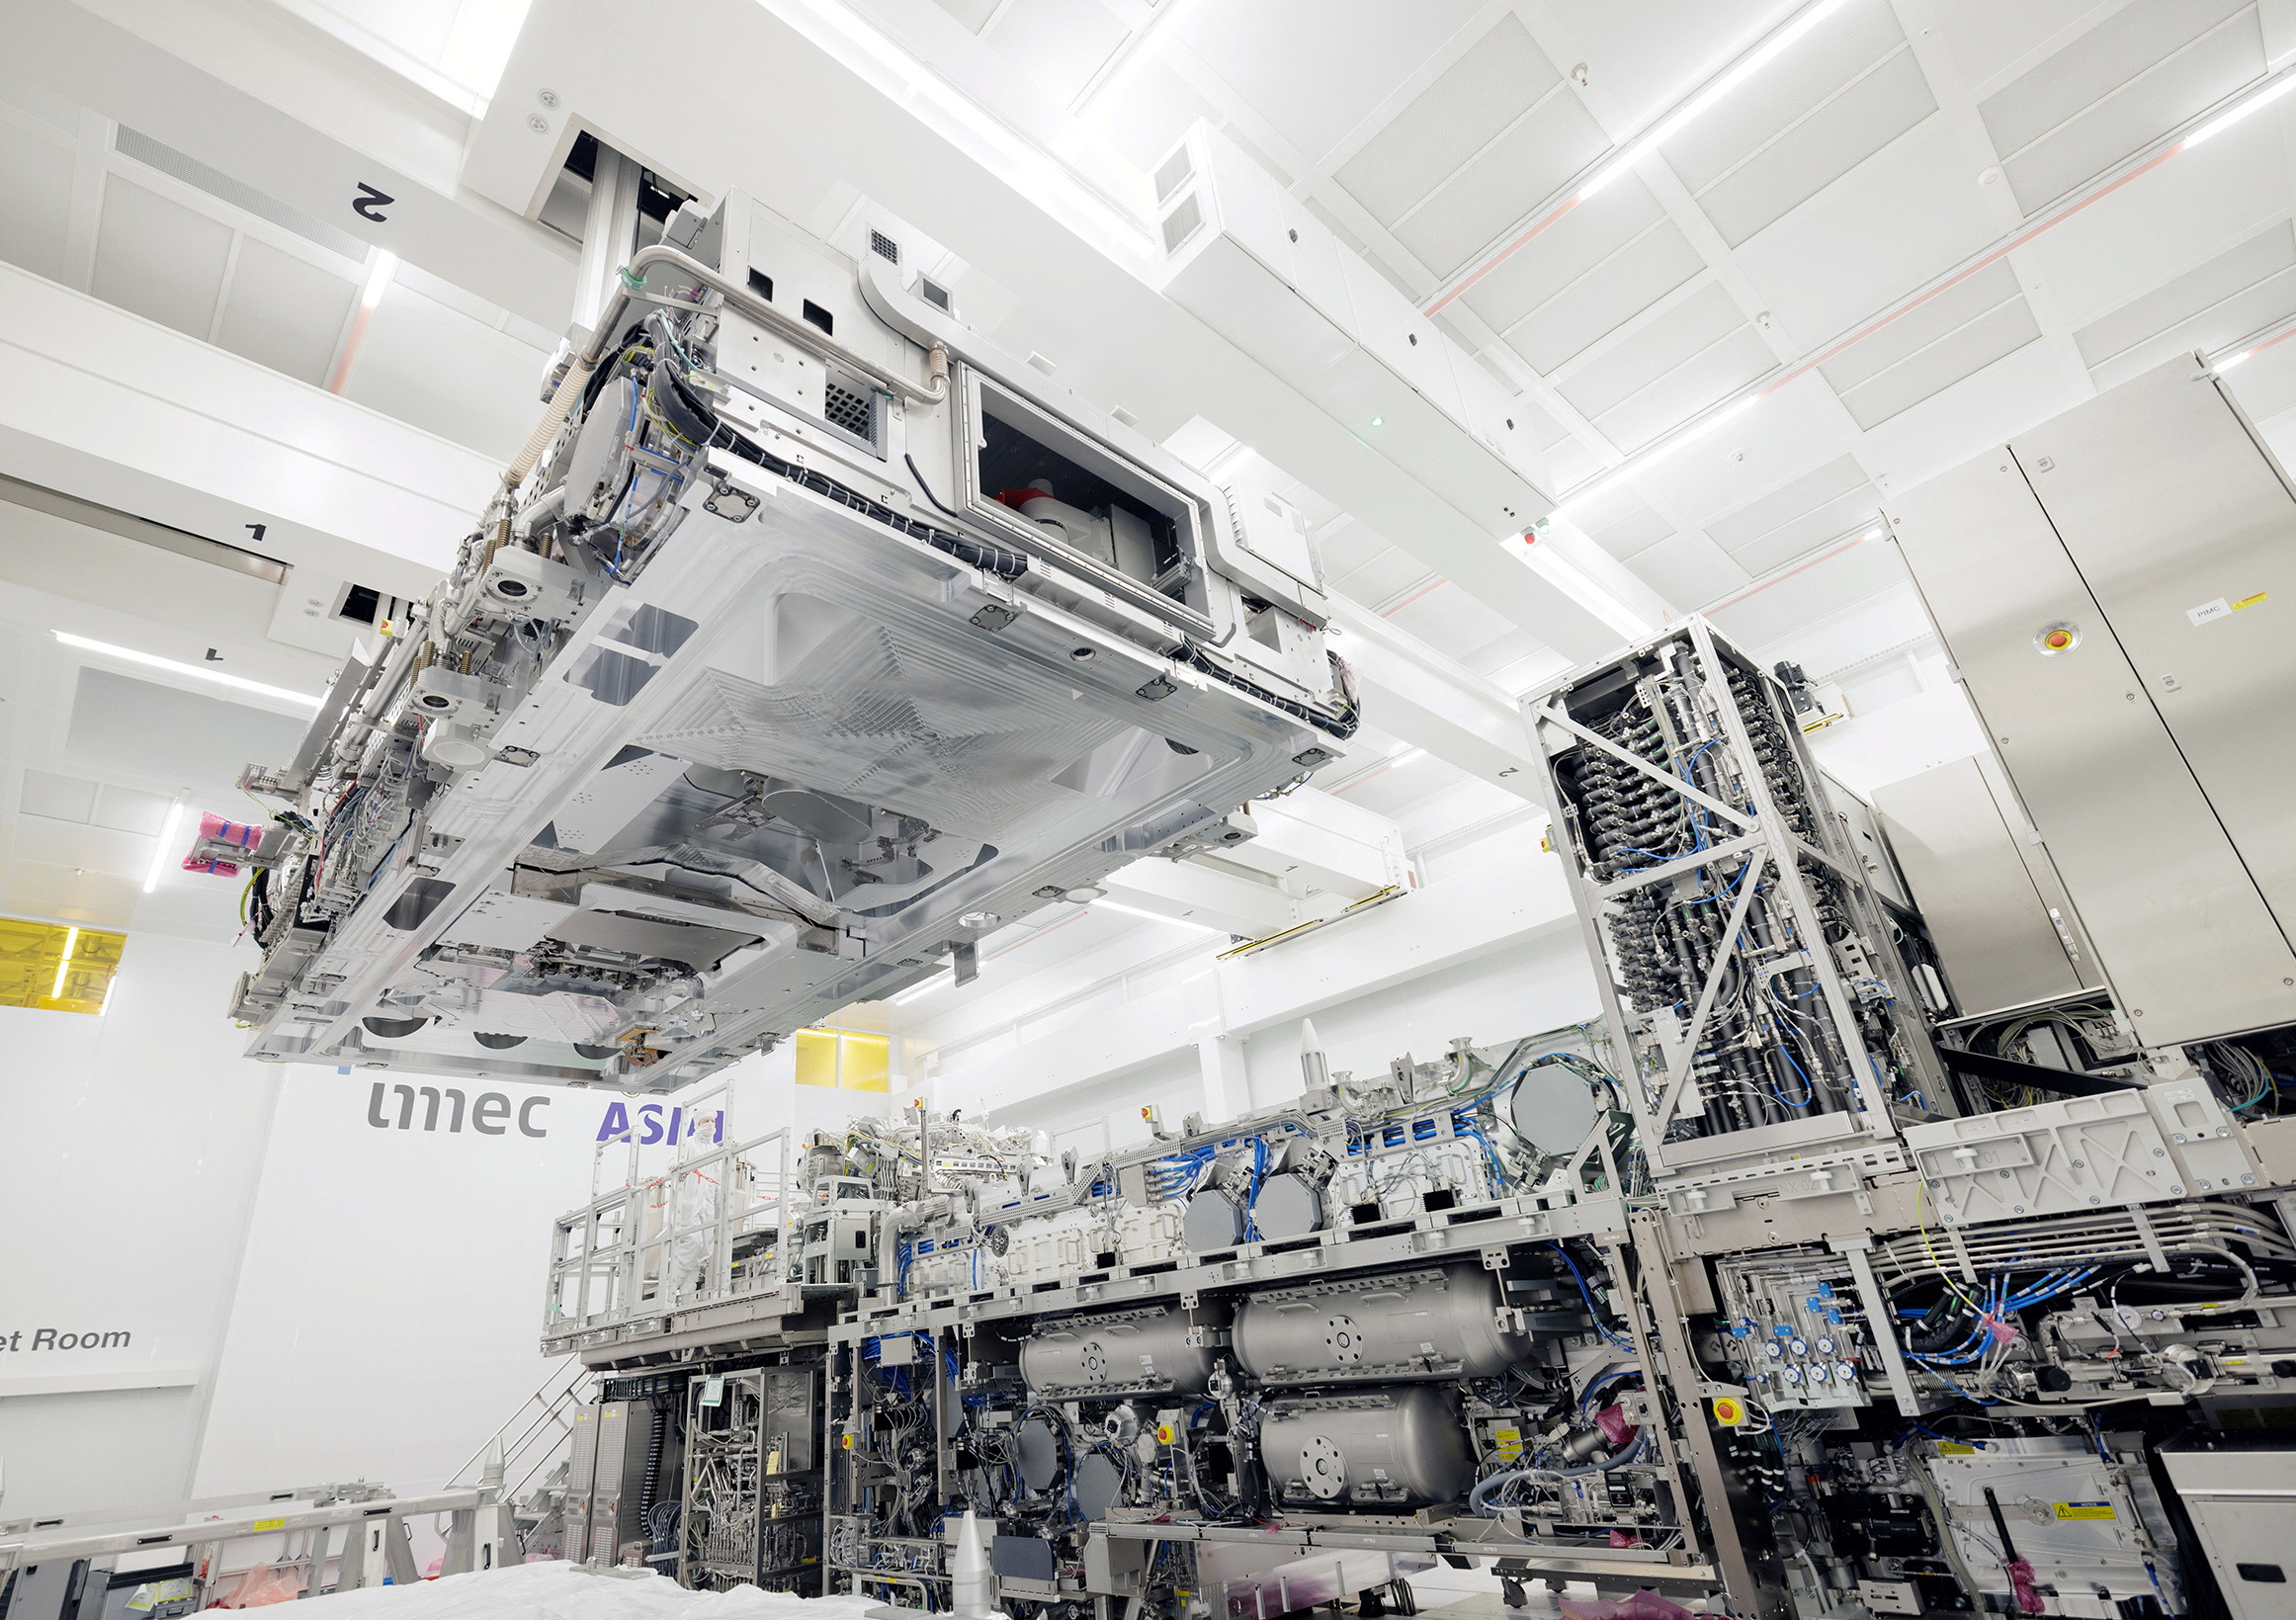 A High NA EUV tool is seen before the attachment of its top module as it is assembled at ASML’s headquarters in Veldhoven